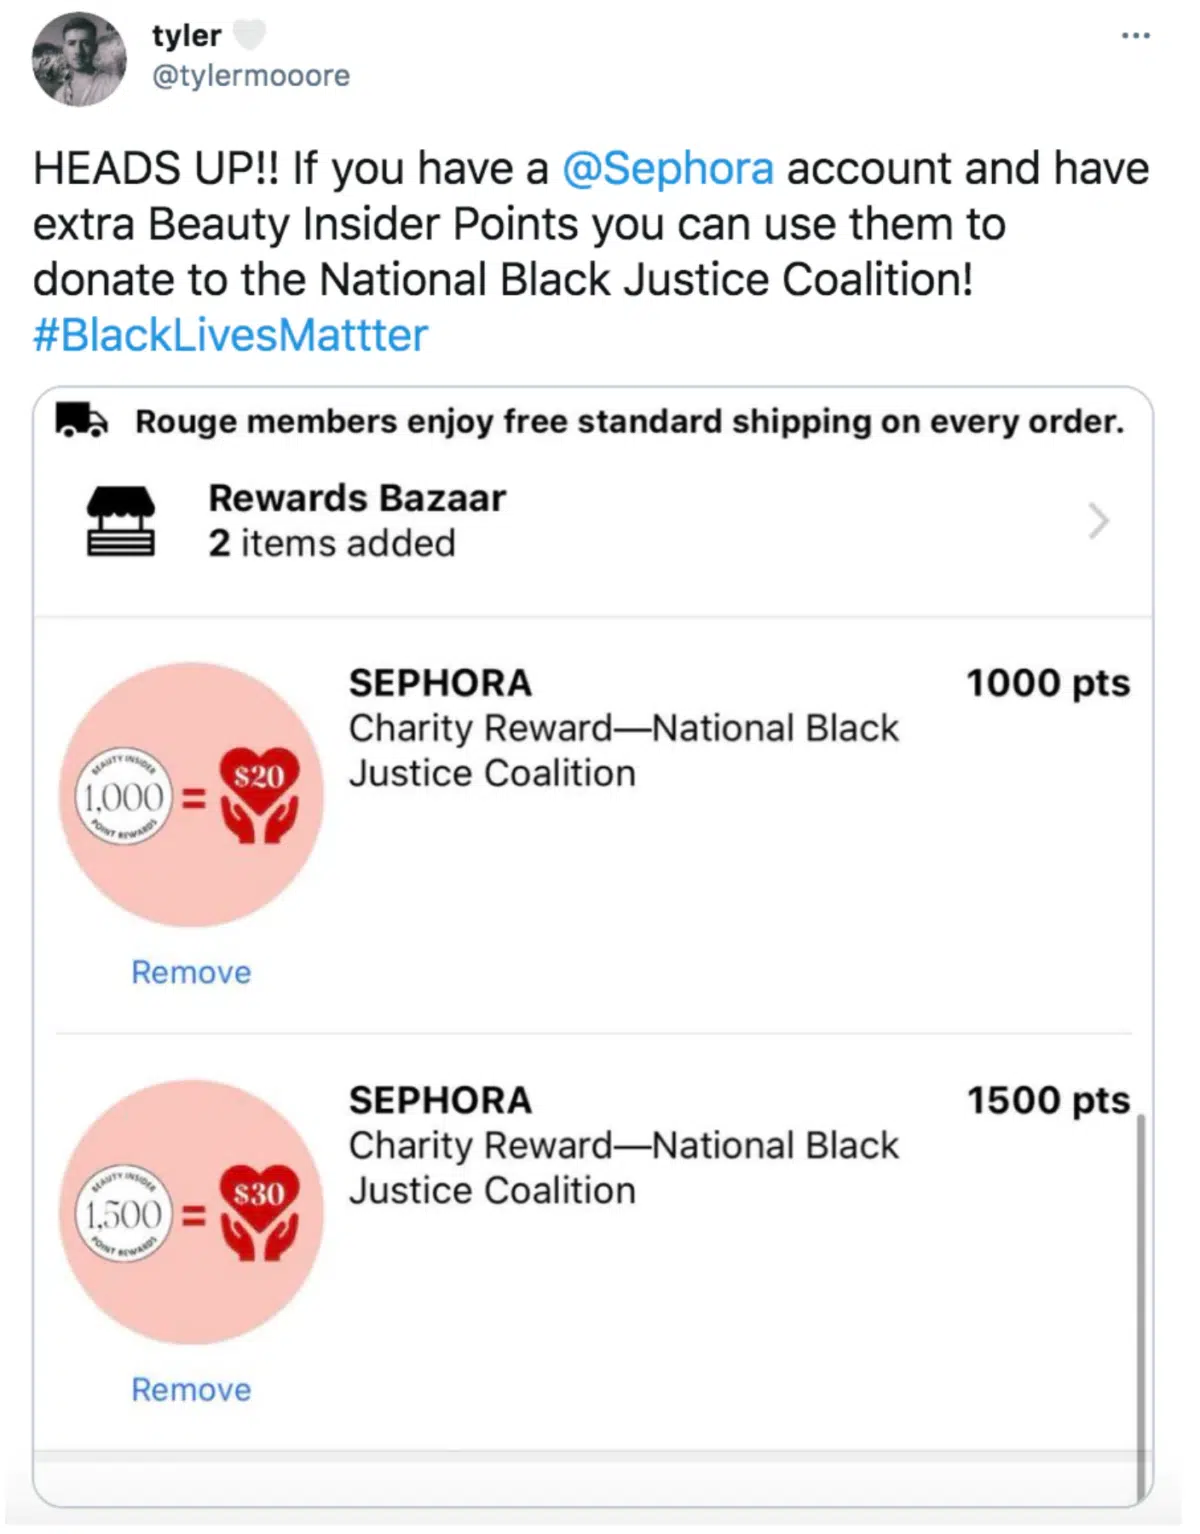 an example of Sephora allowing rewards members to donate to the National Black Justice Coalition